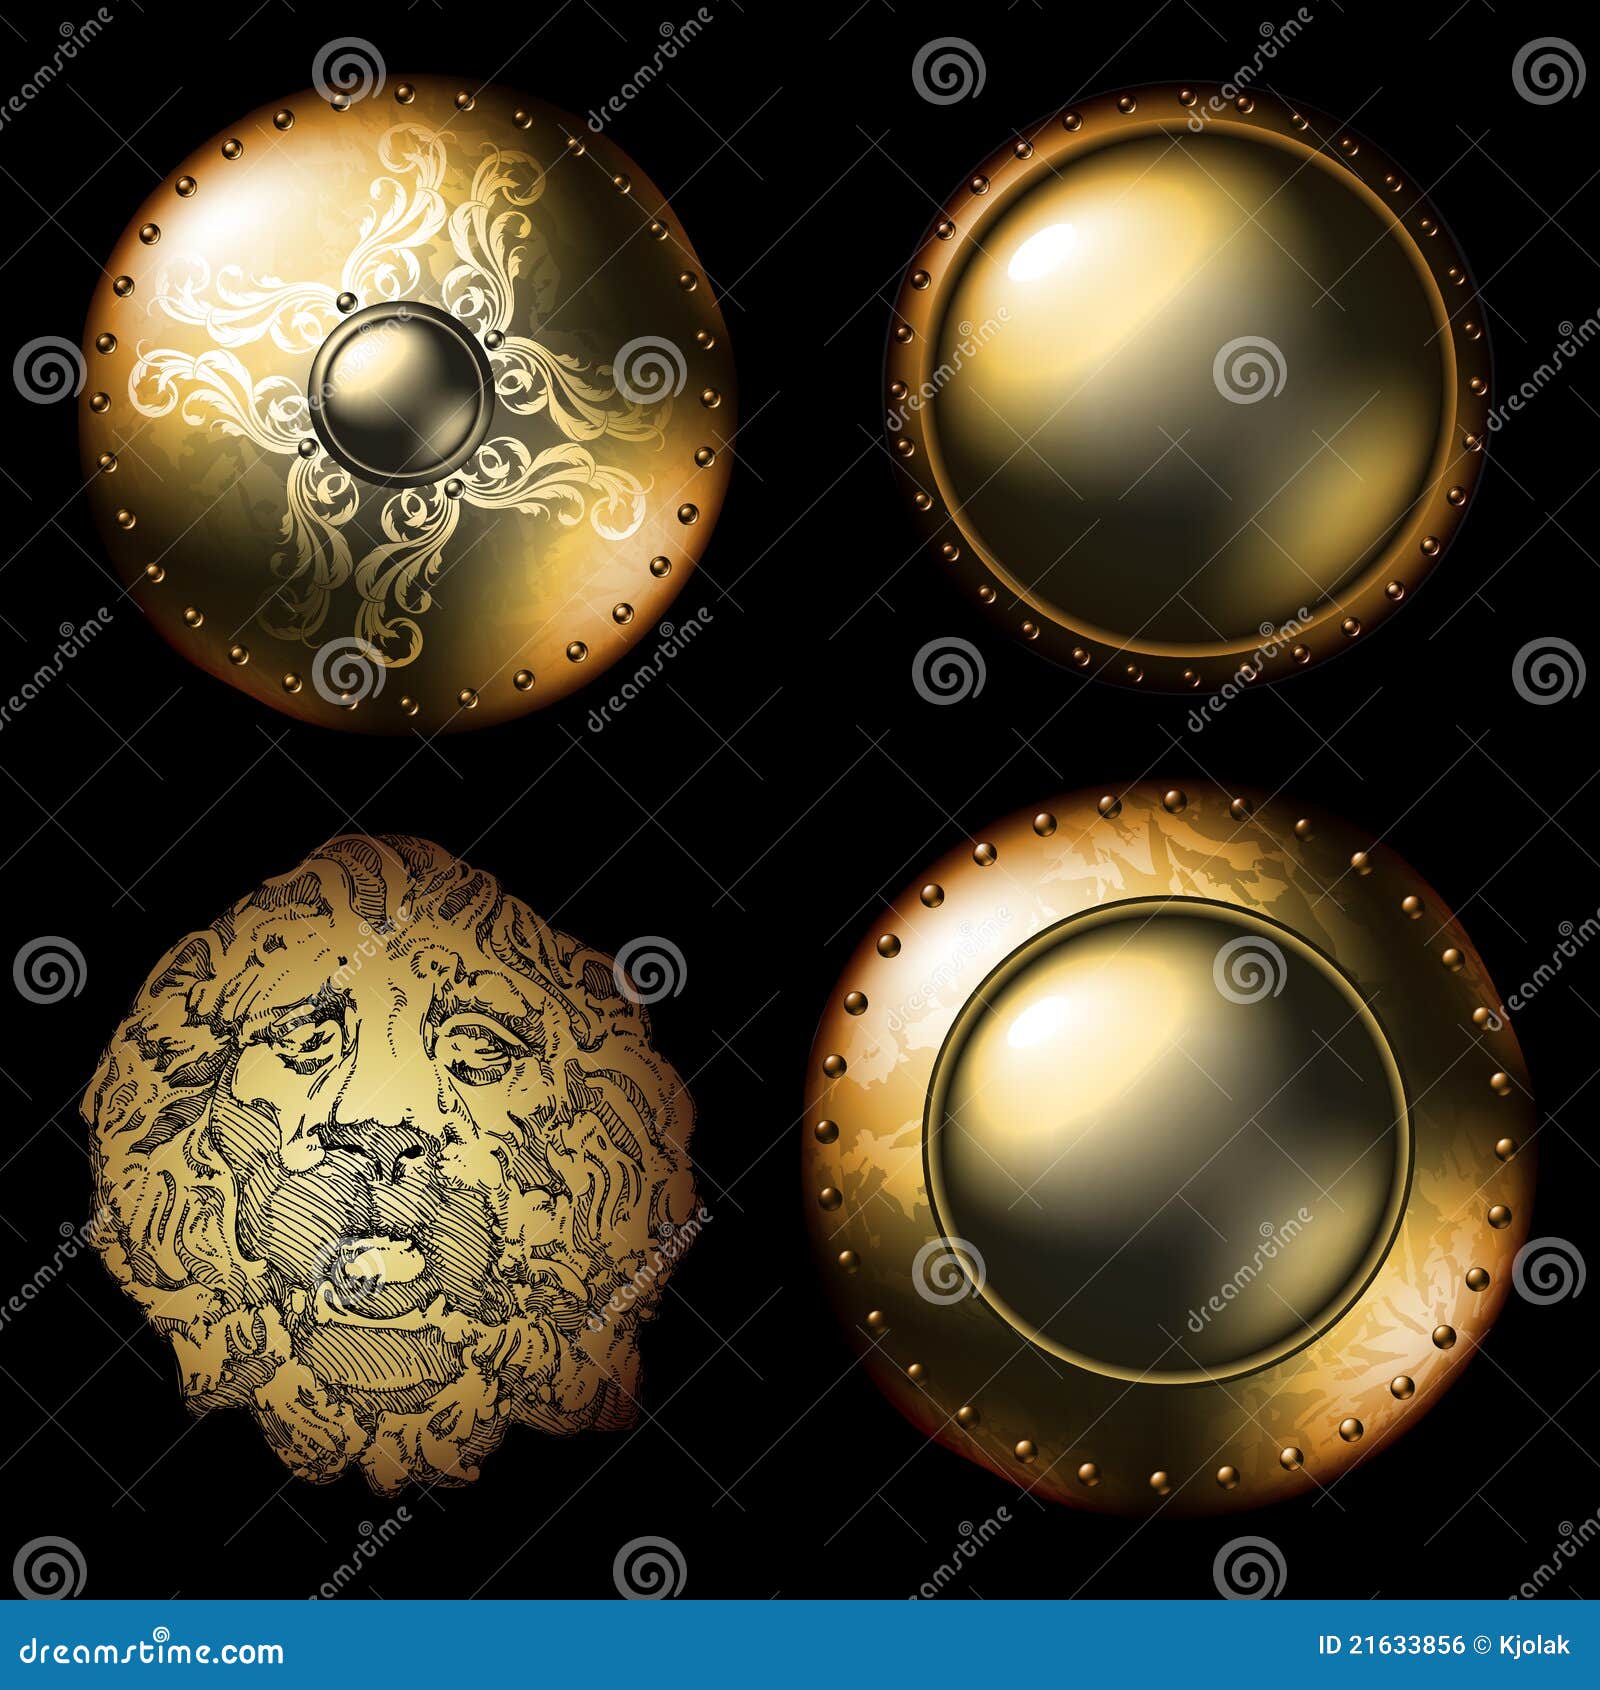 411 Lv Gold Images, Stock Photos, 3D objects, & Vectors